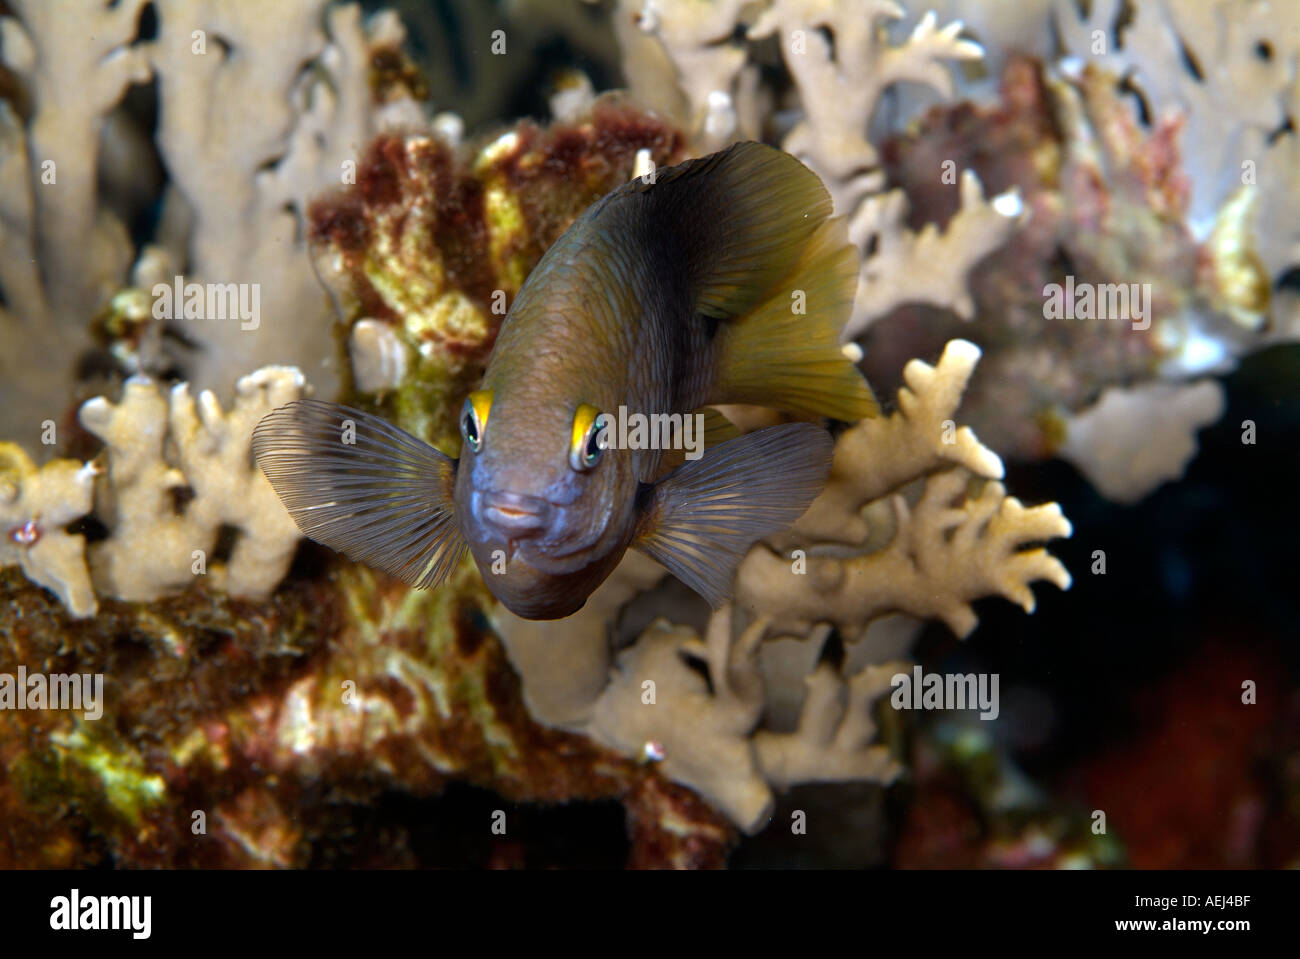 Cocoa damselfish in the Gulf of Mexico, off Texas Stock Photo